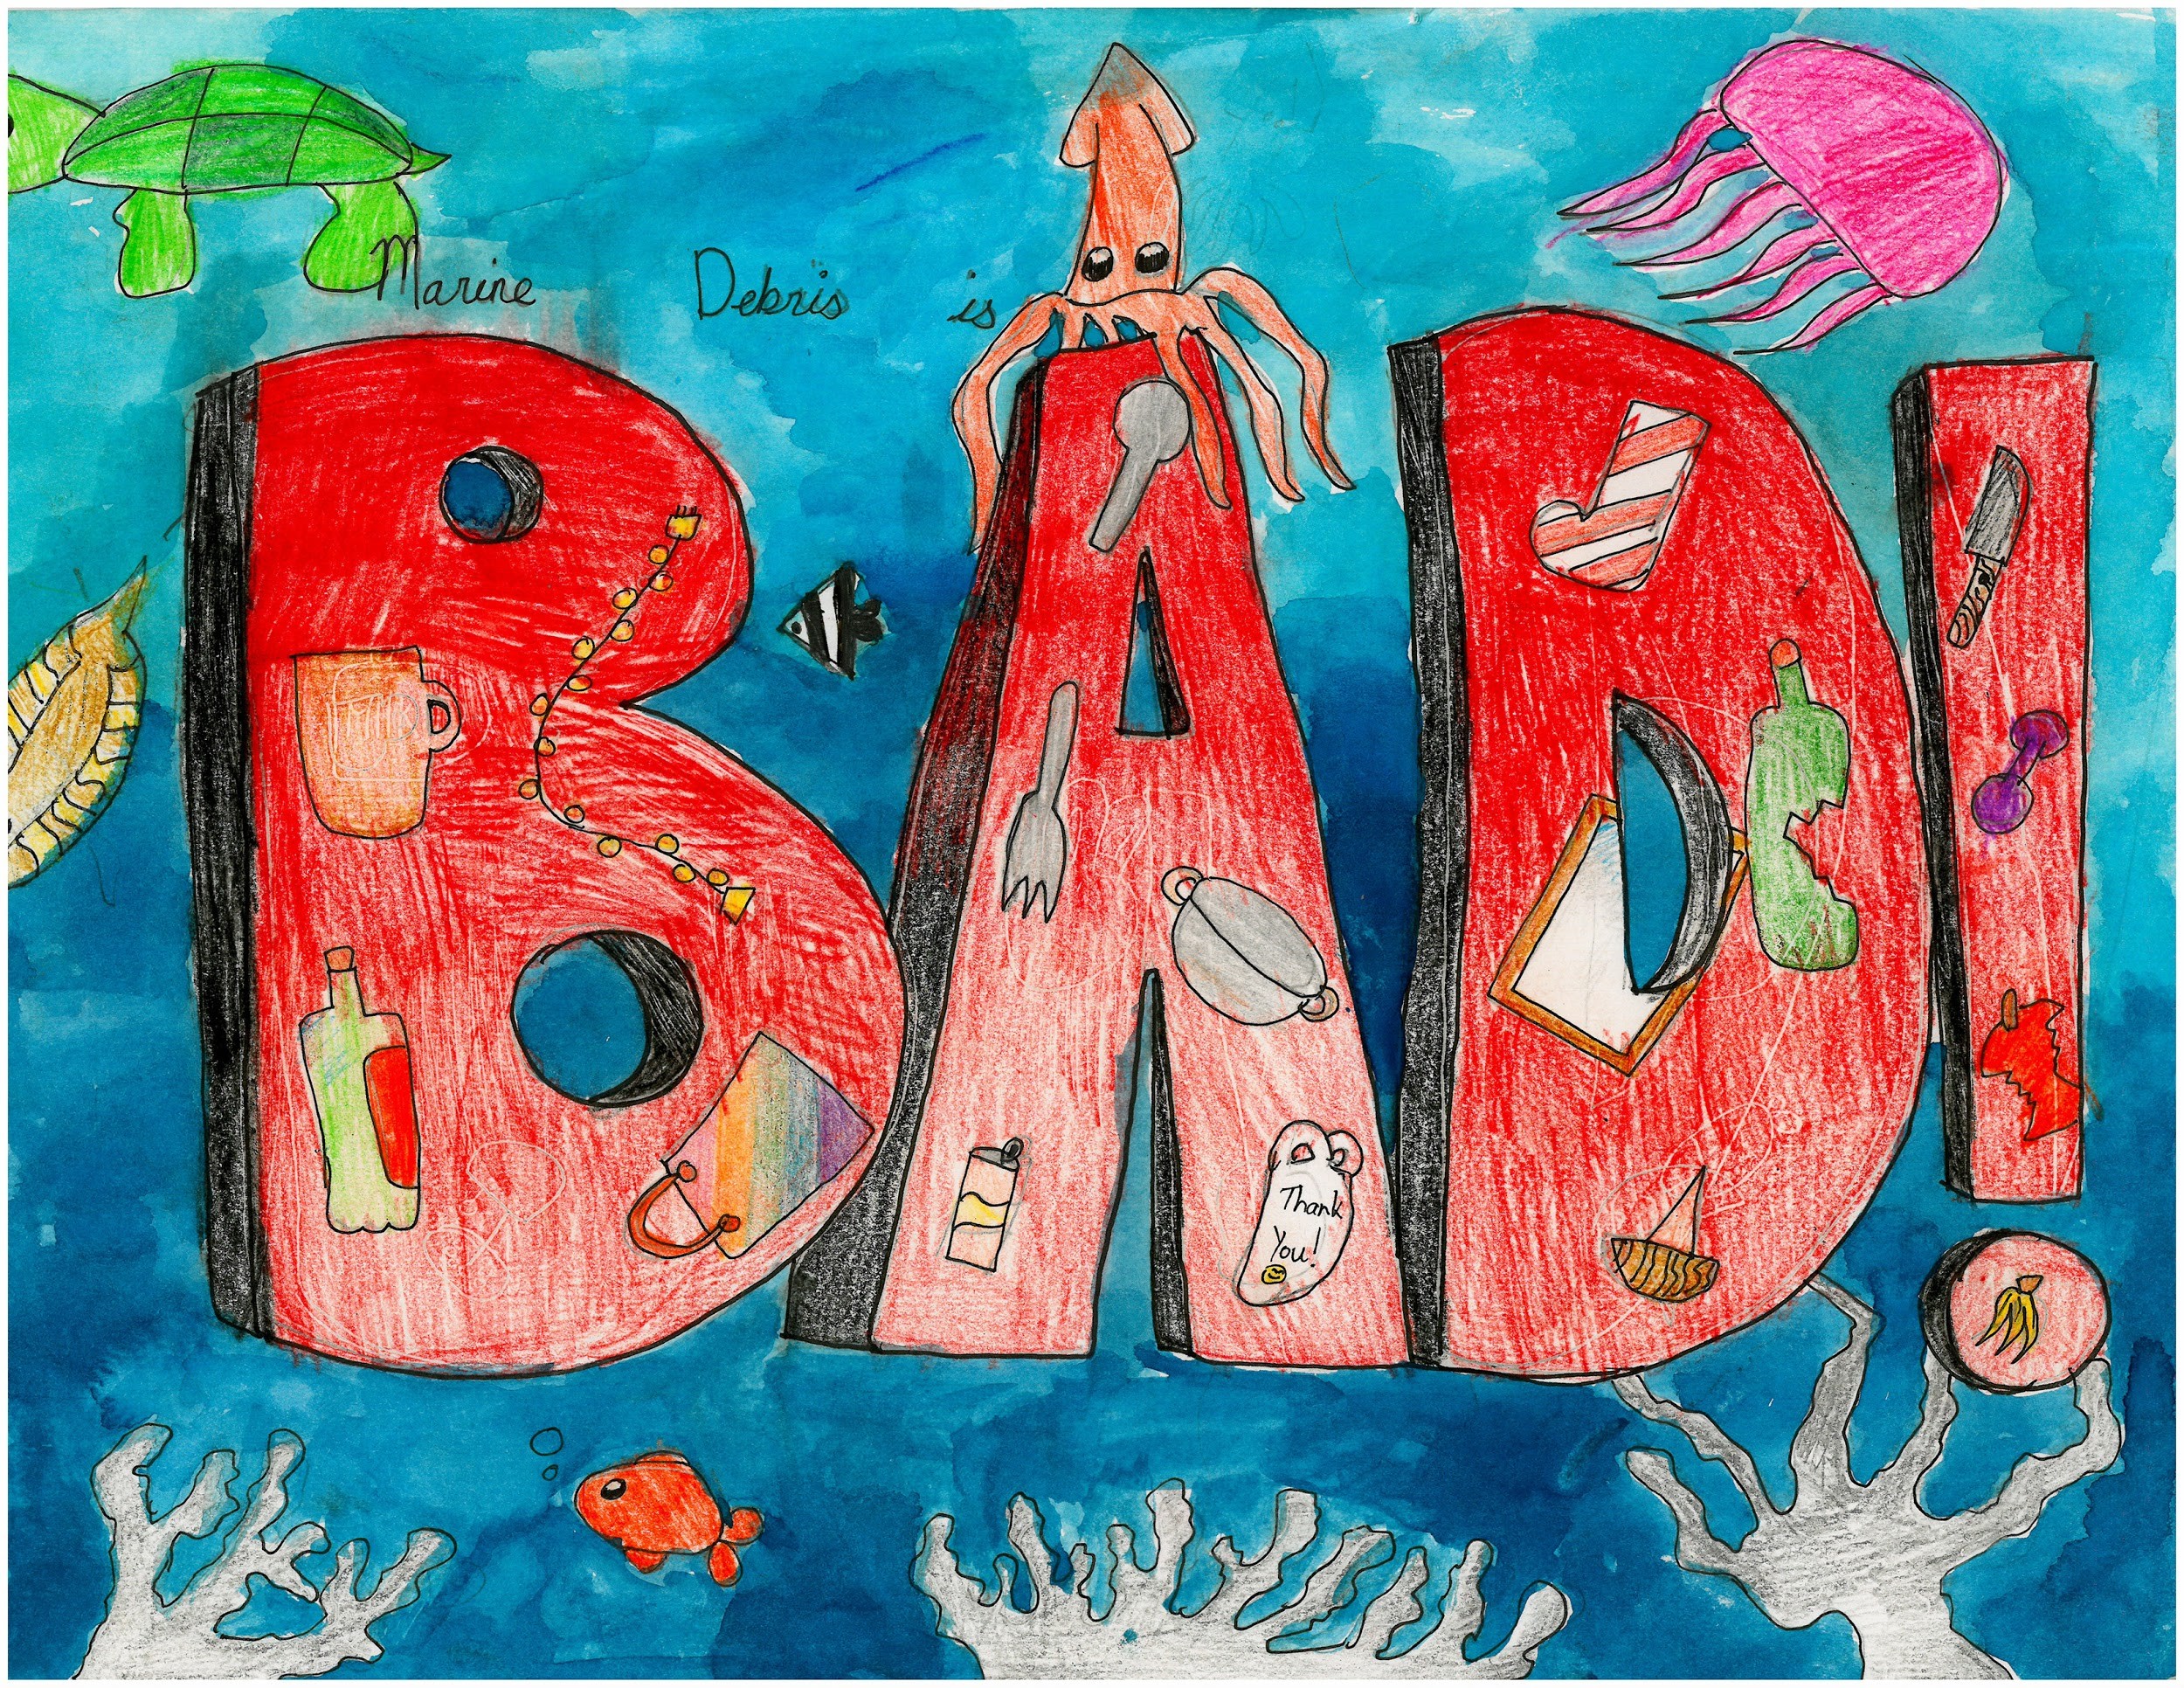 Child’s artwork depicting an underwater scene featuring jellyfish, coral, fish, a sea turtle, and an octopus. It reads, “Marine debris is BAD.” The word “BAD” is written in large block letters, and inside the letters are illustrations of litter, including cups, broken bottles, plastic bags, plastic cutlery, cans, an apple core, and a knife.